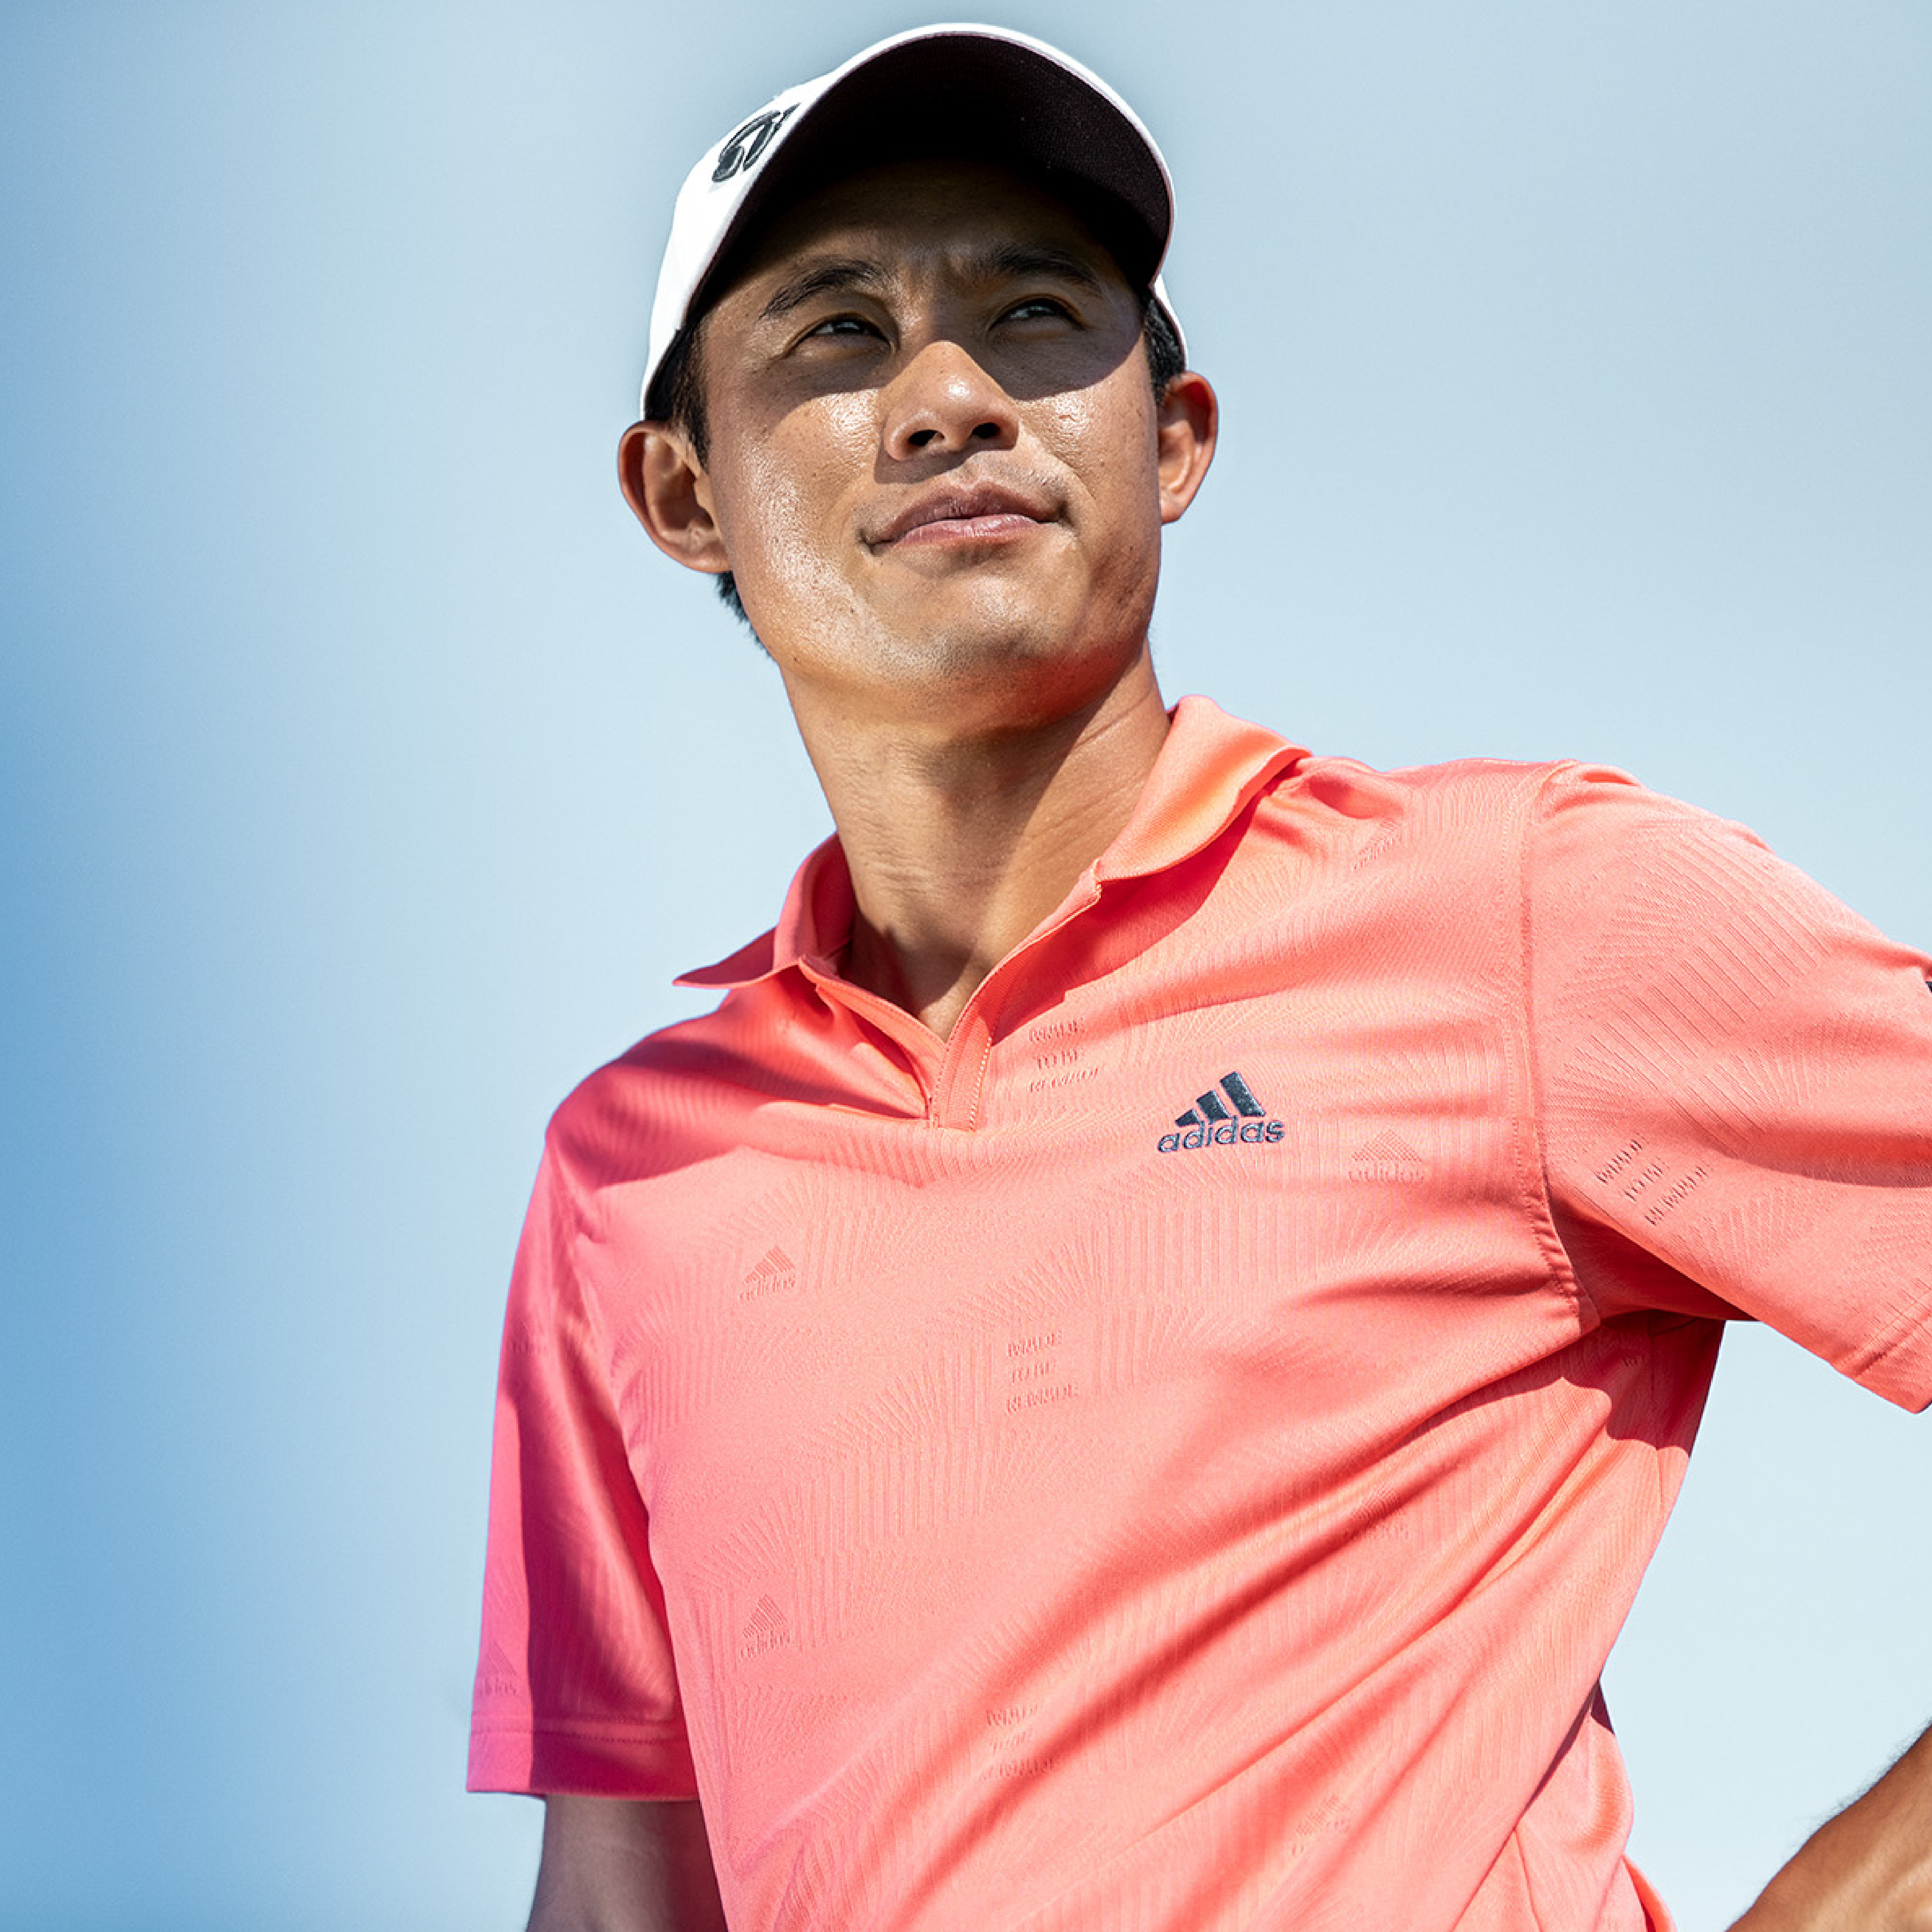 this sustainable polo shirt to Adidas once you've worn it out | Golf Equipment: Clubs, Balls, | Golf Digest